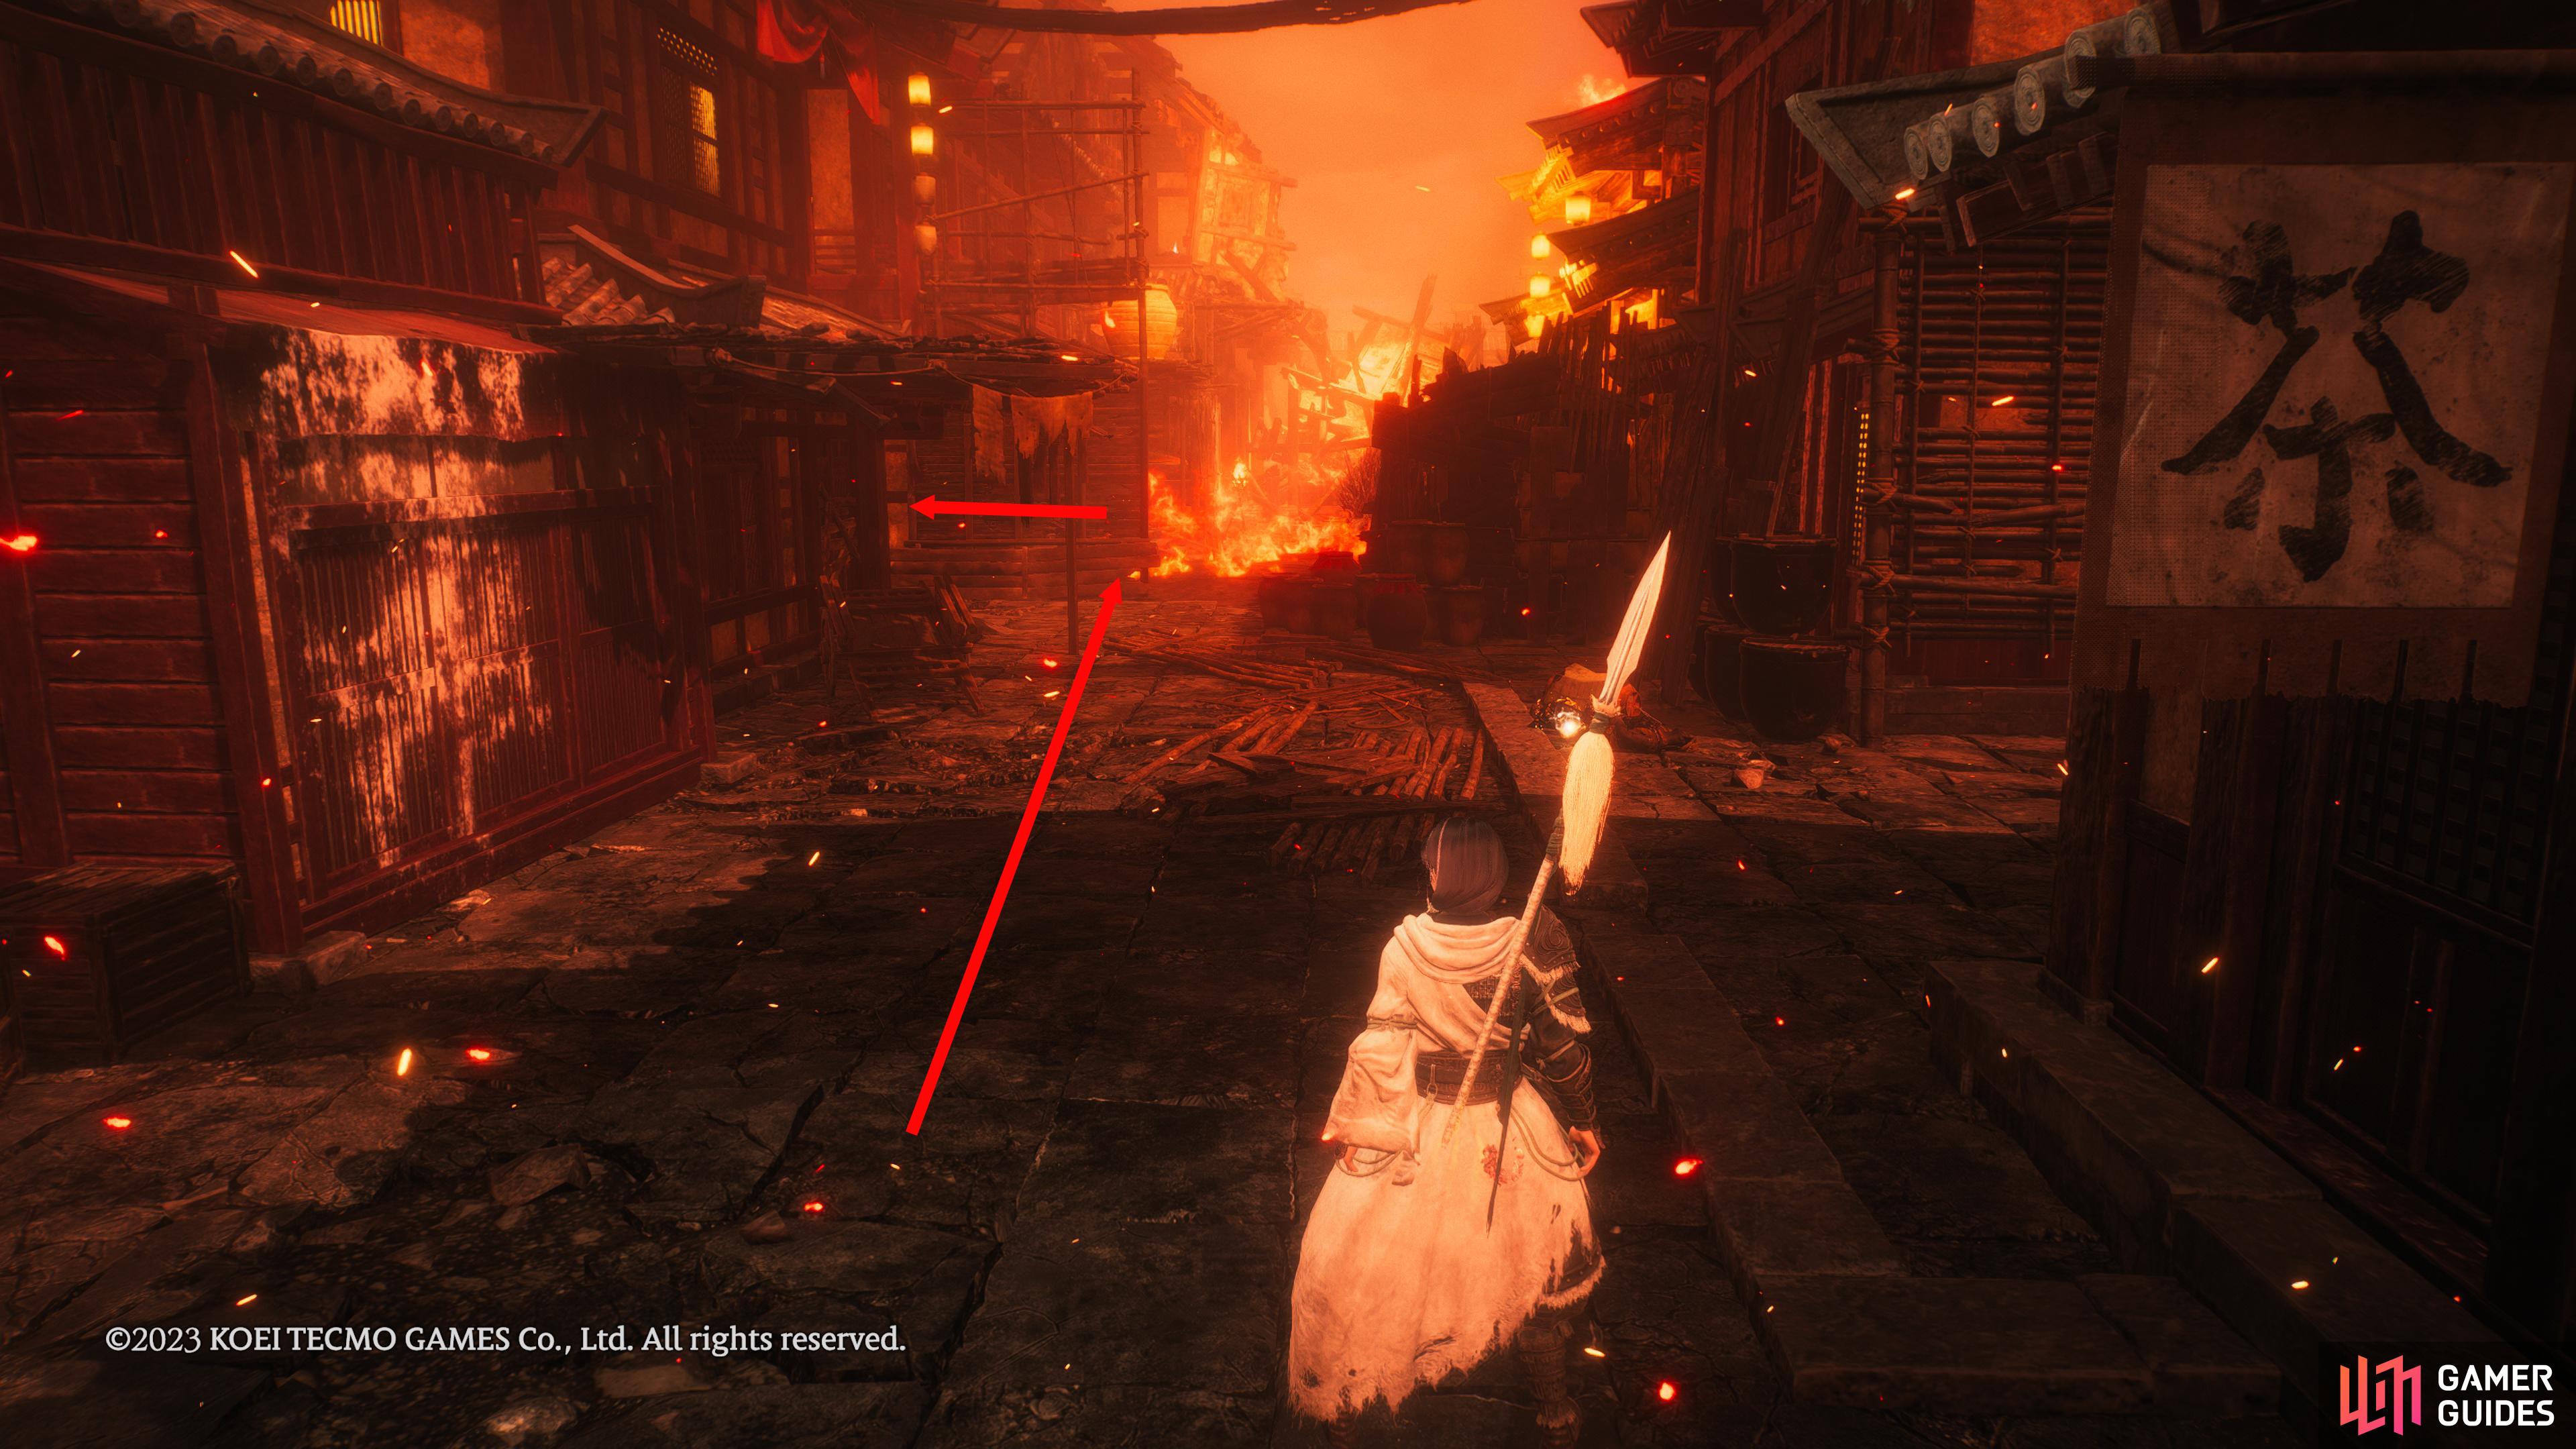 From the Battle Flag in the center of town. Walk towards the flames, and turn left into the next area.